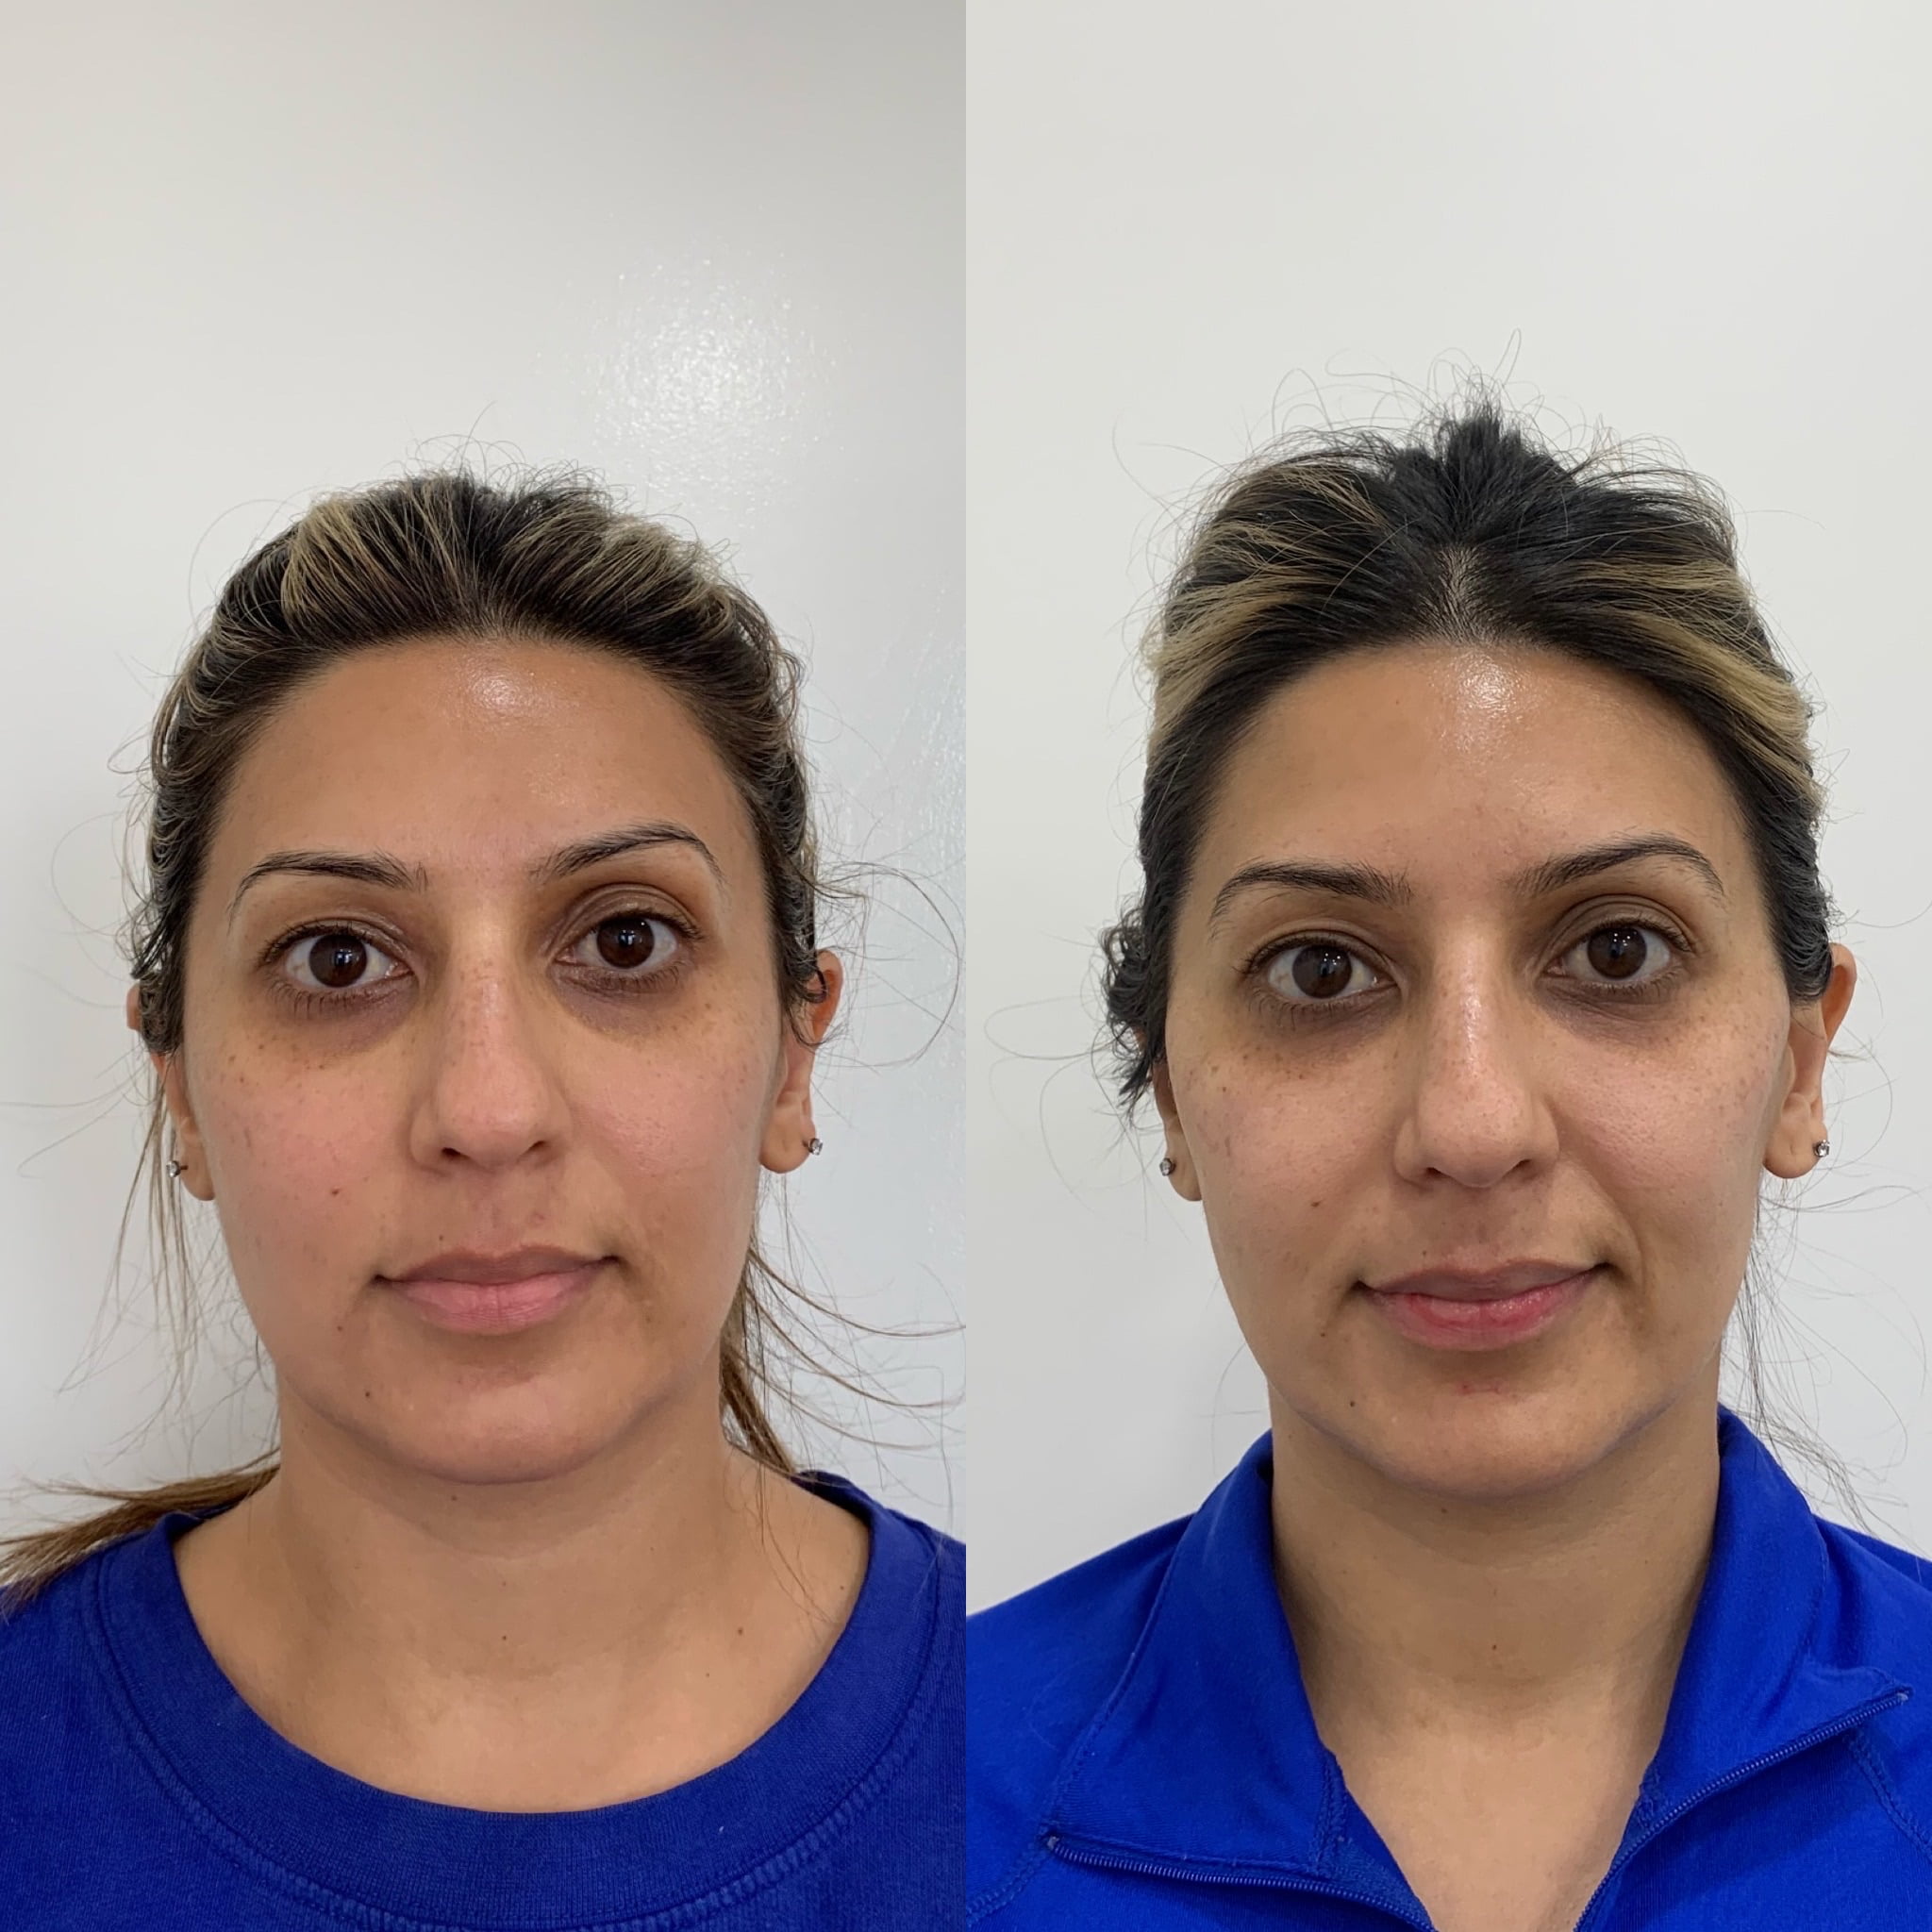 Before and After Cheeks after treatment in Beauty Boost Med Spa at Newport Beach, CA